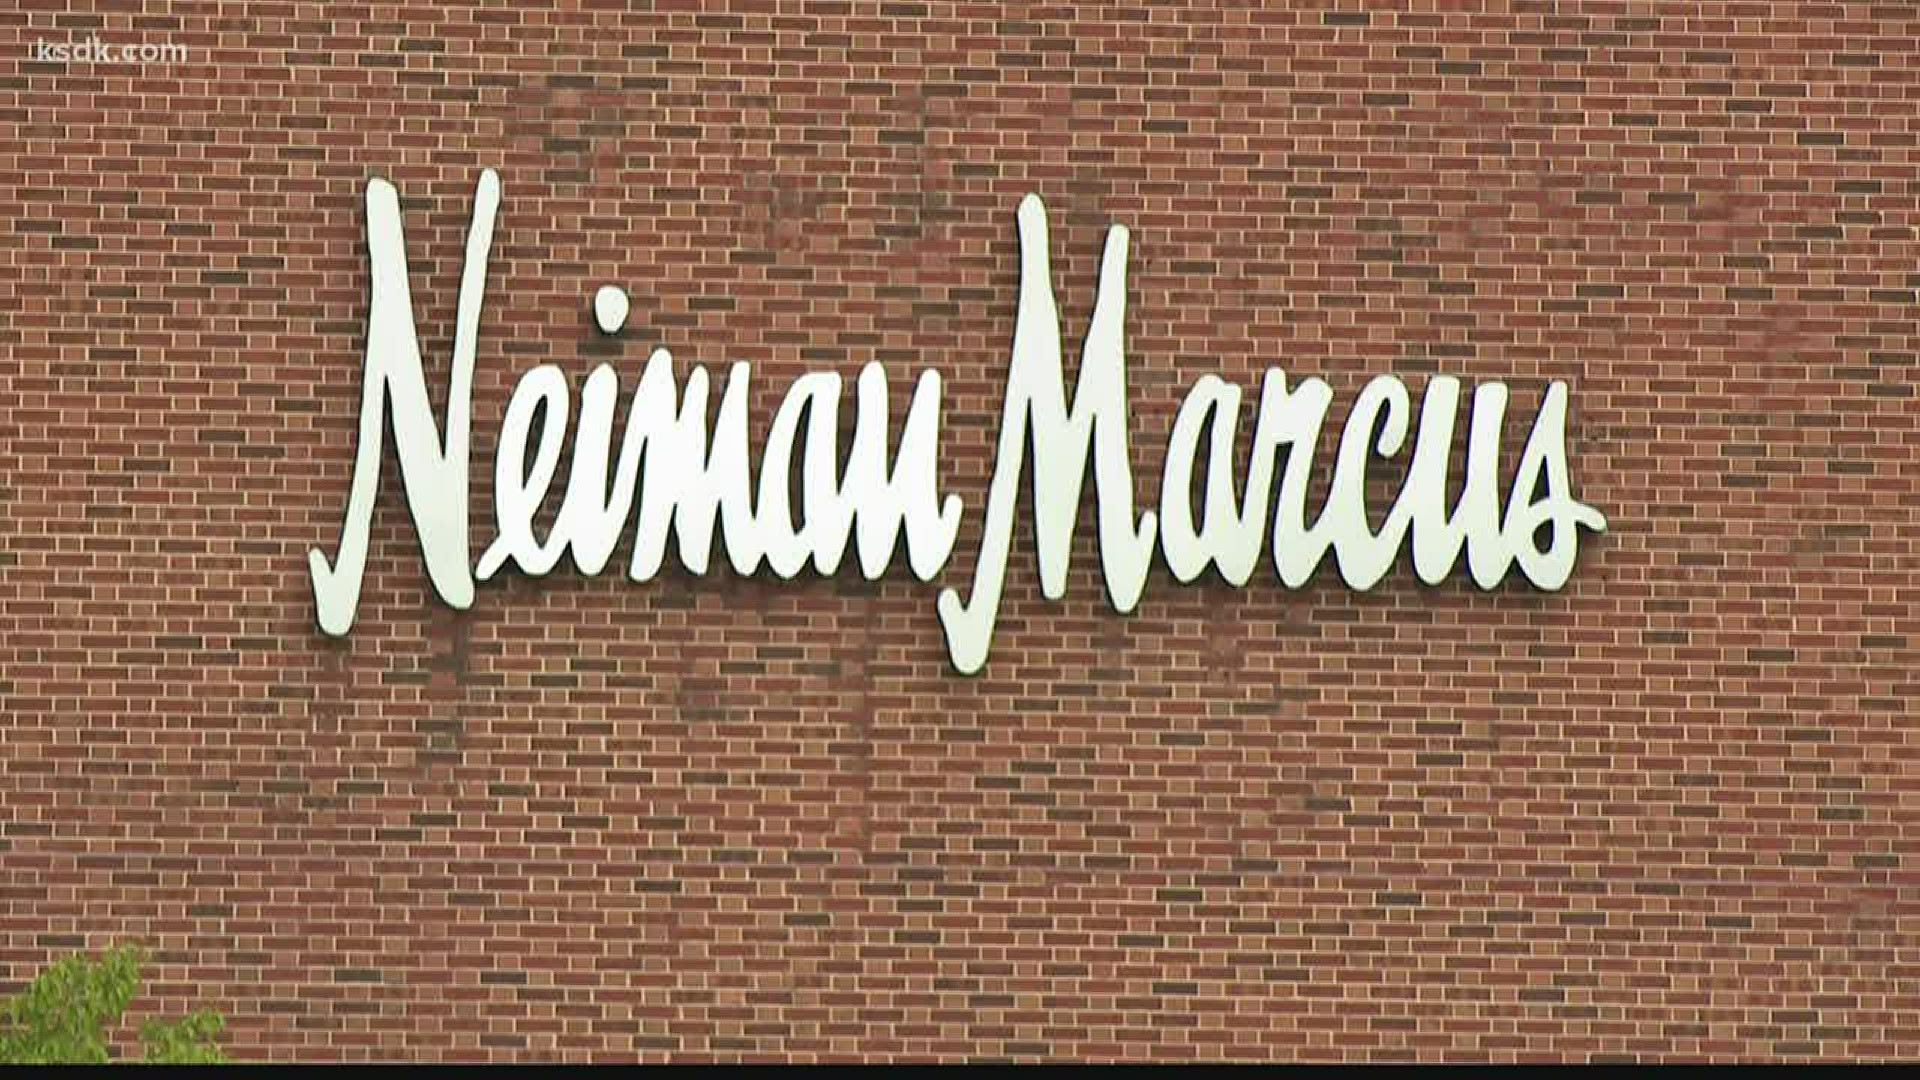 Neiman Marcus to file for bankruptcy | 0